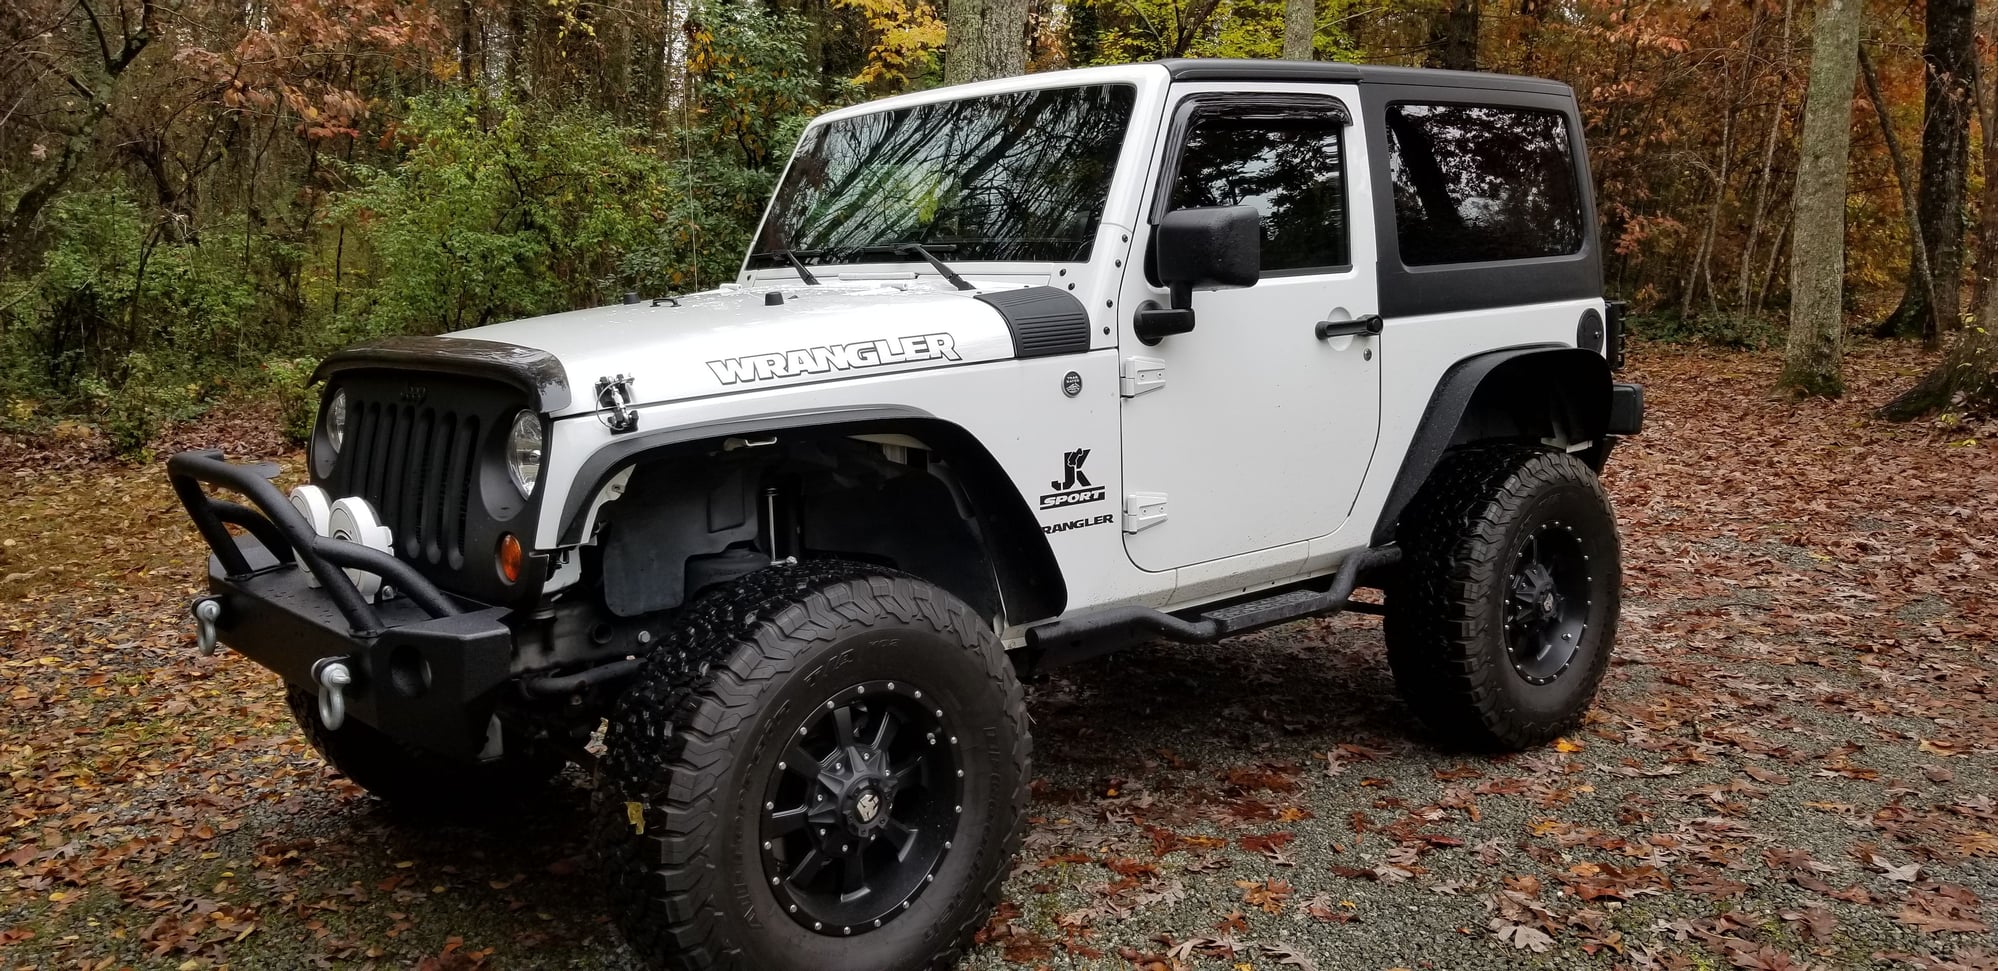 2013 Jeep Wrangler - Wrangler JK Sport - Used - VIN 1C4AJWAG9DL623492 - 66,500 Miles - 6 cyl - 4WD - Automatic - SUV - White - East Flat Rock, NC 28726, United States